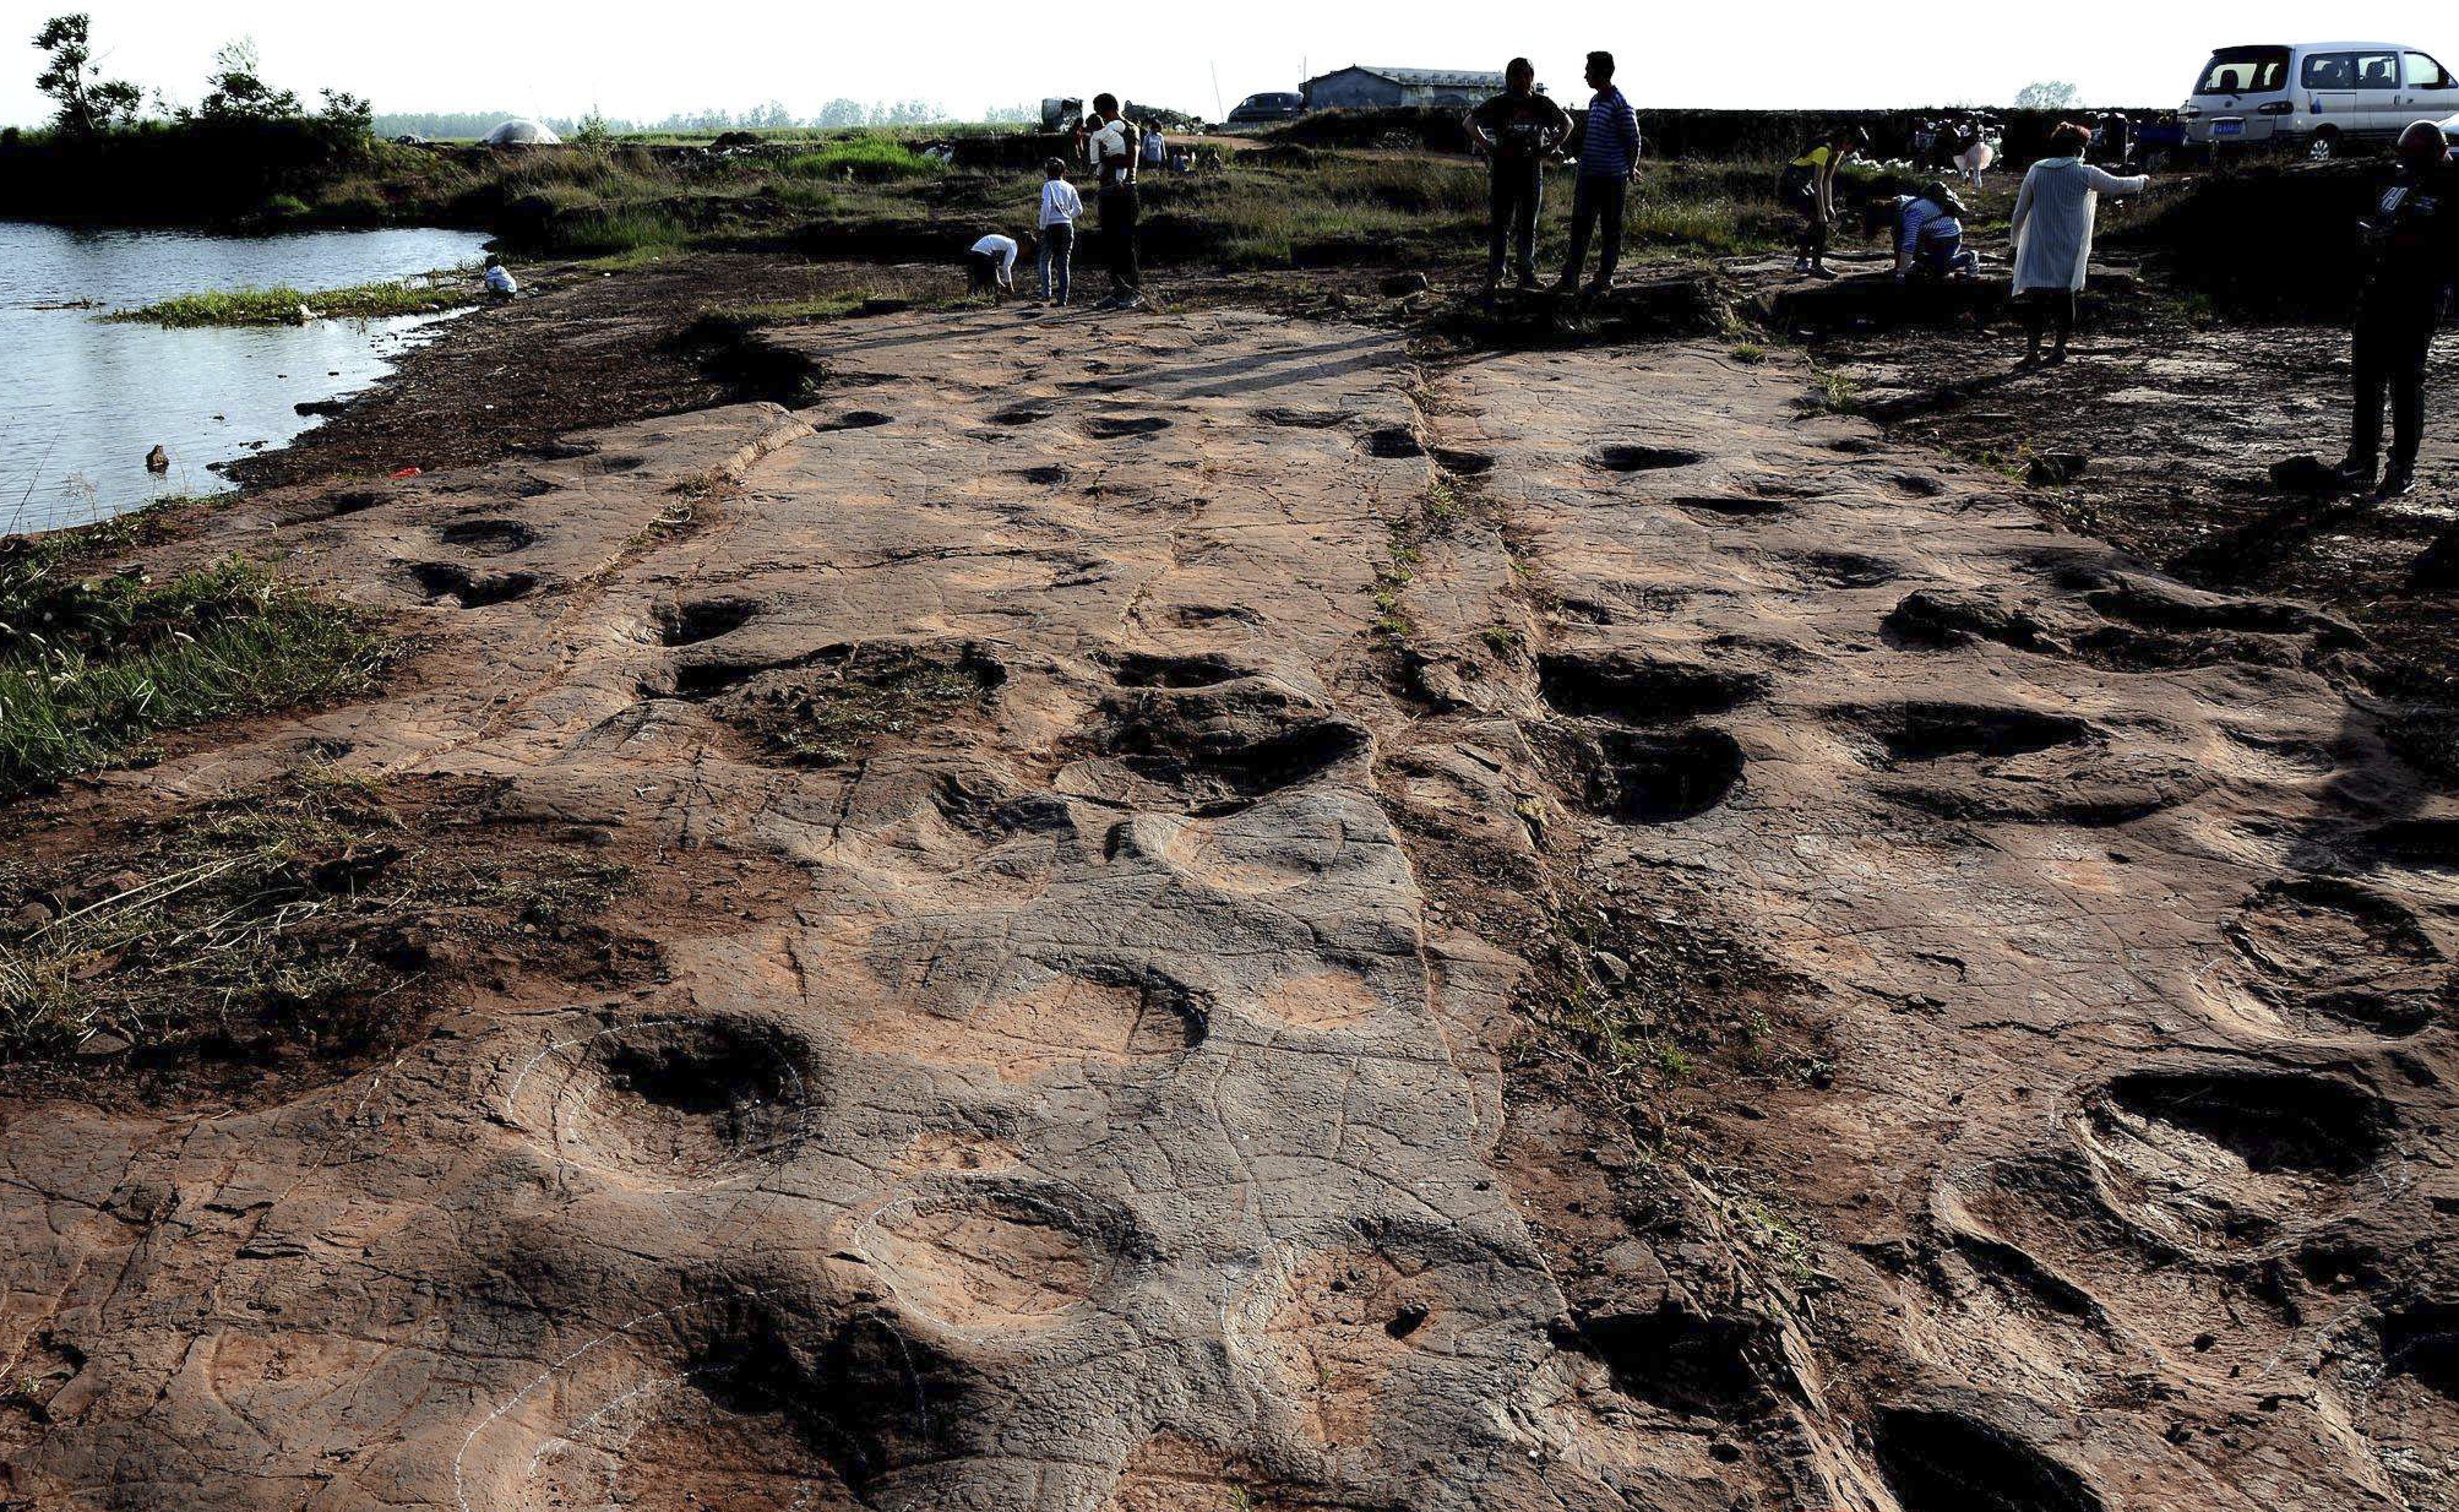 Footprints found in Shandong province suggest beasts were social and travelled together, scientists say